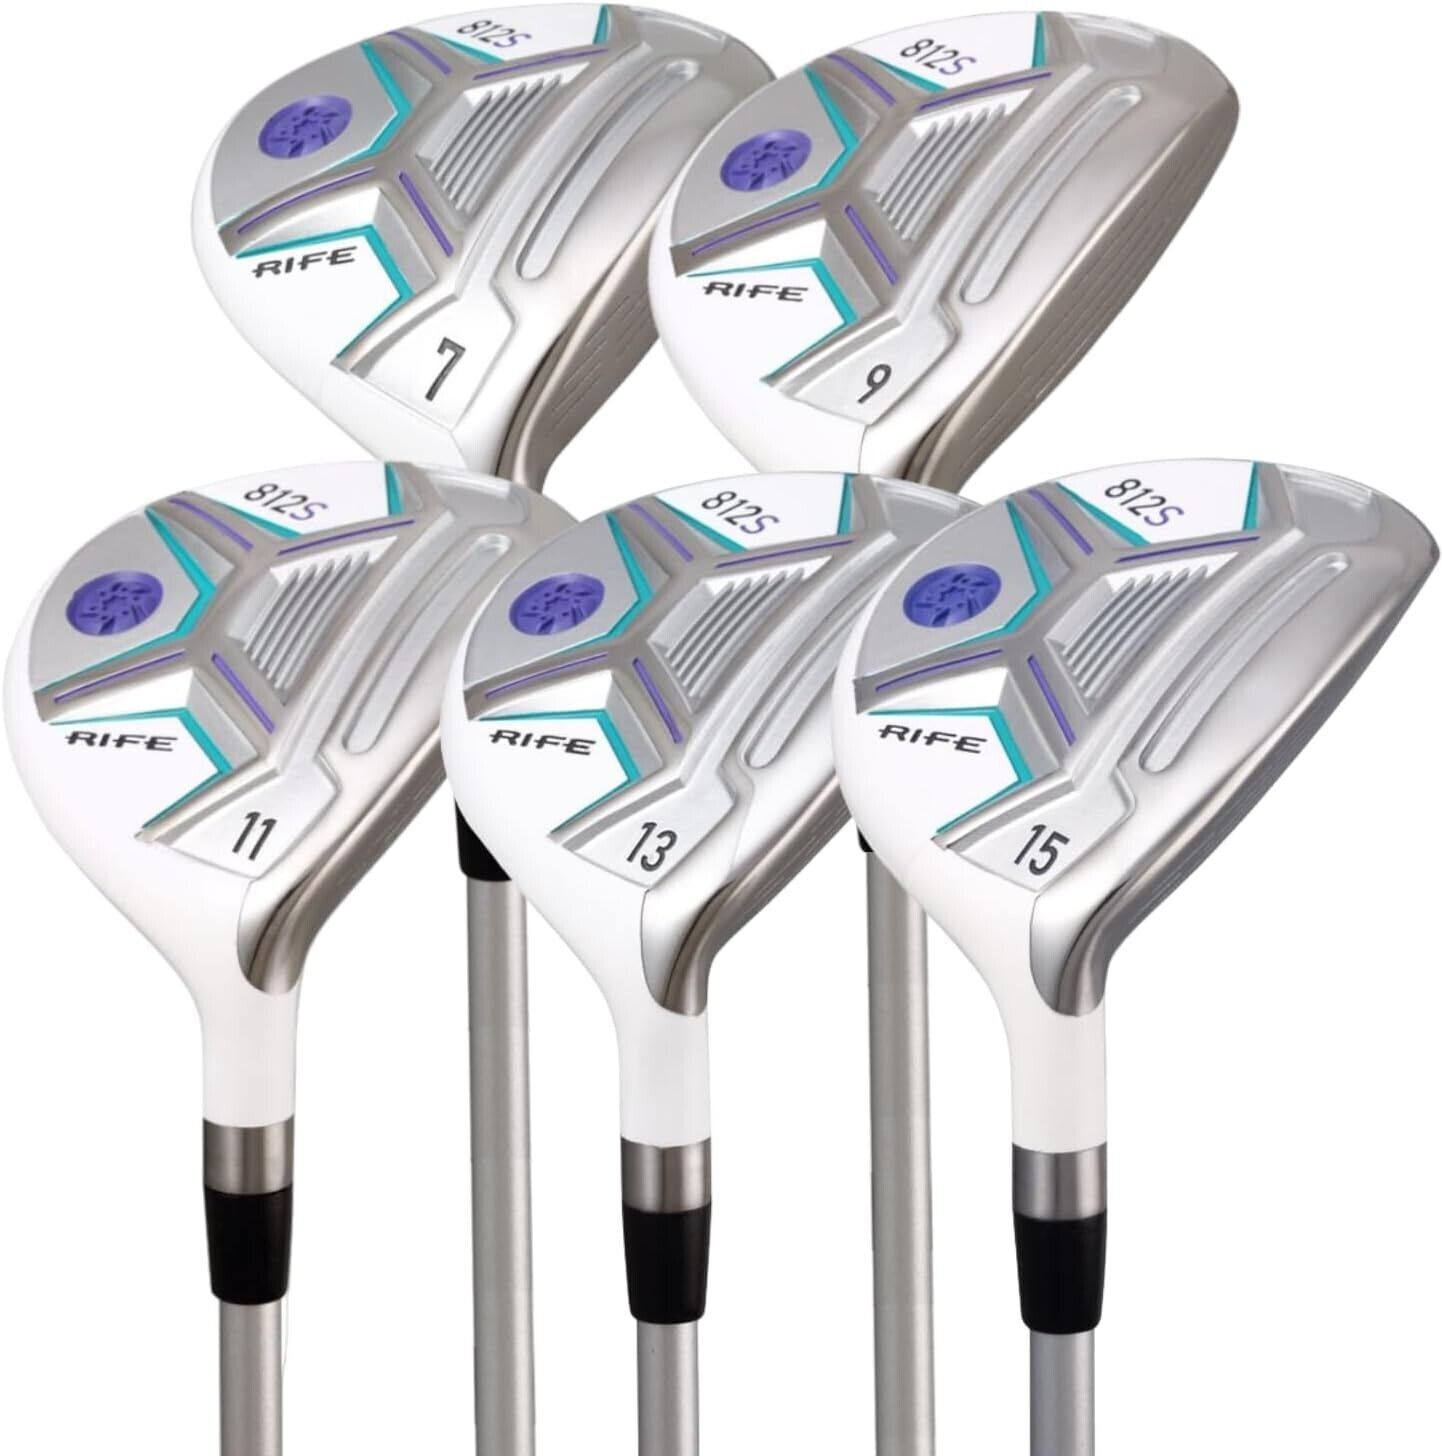 Womens Rife Golf 812s Offset #7, 9, 11, 13, 15 Fairway Wood Set "L" Right Handed